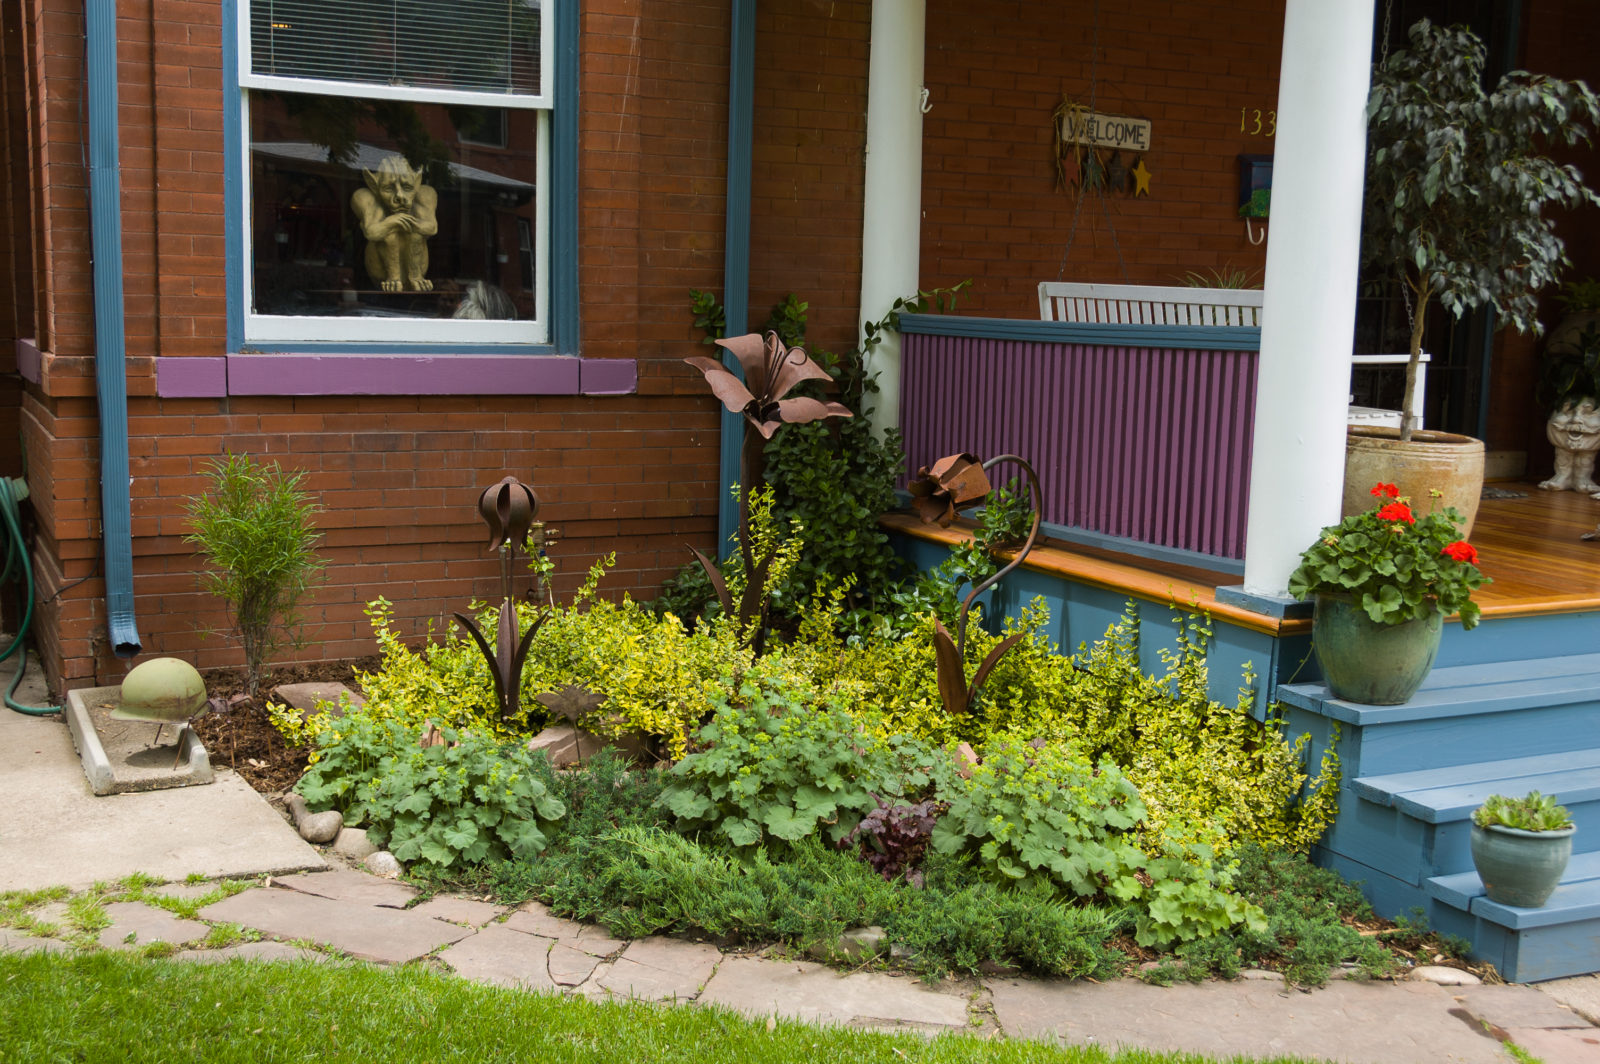 Dan designed a lovely corner garden by the entryway for this client